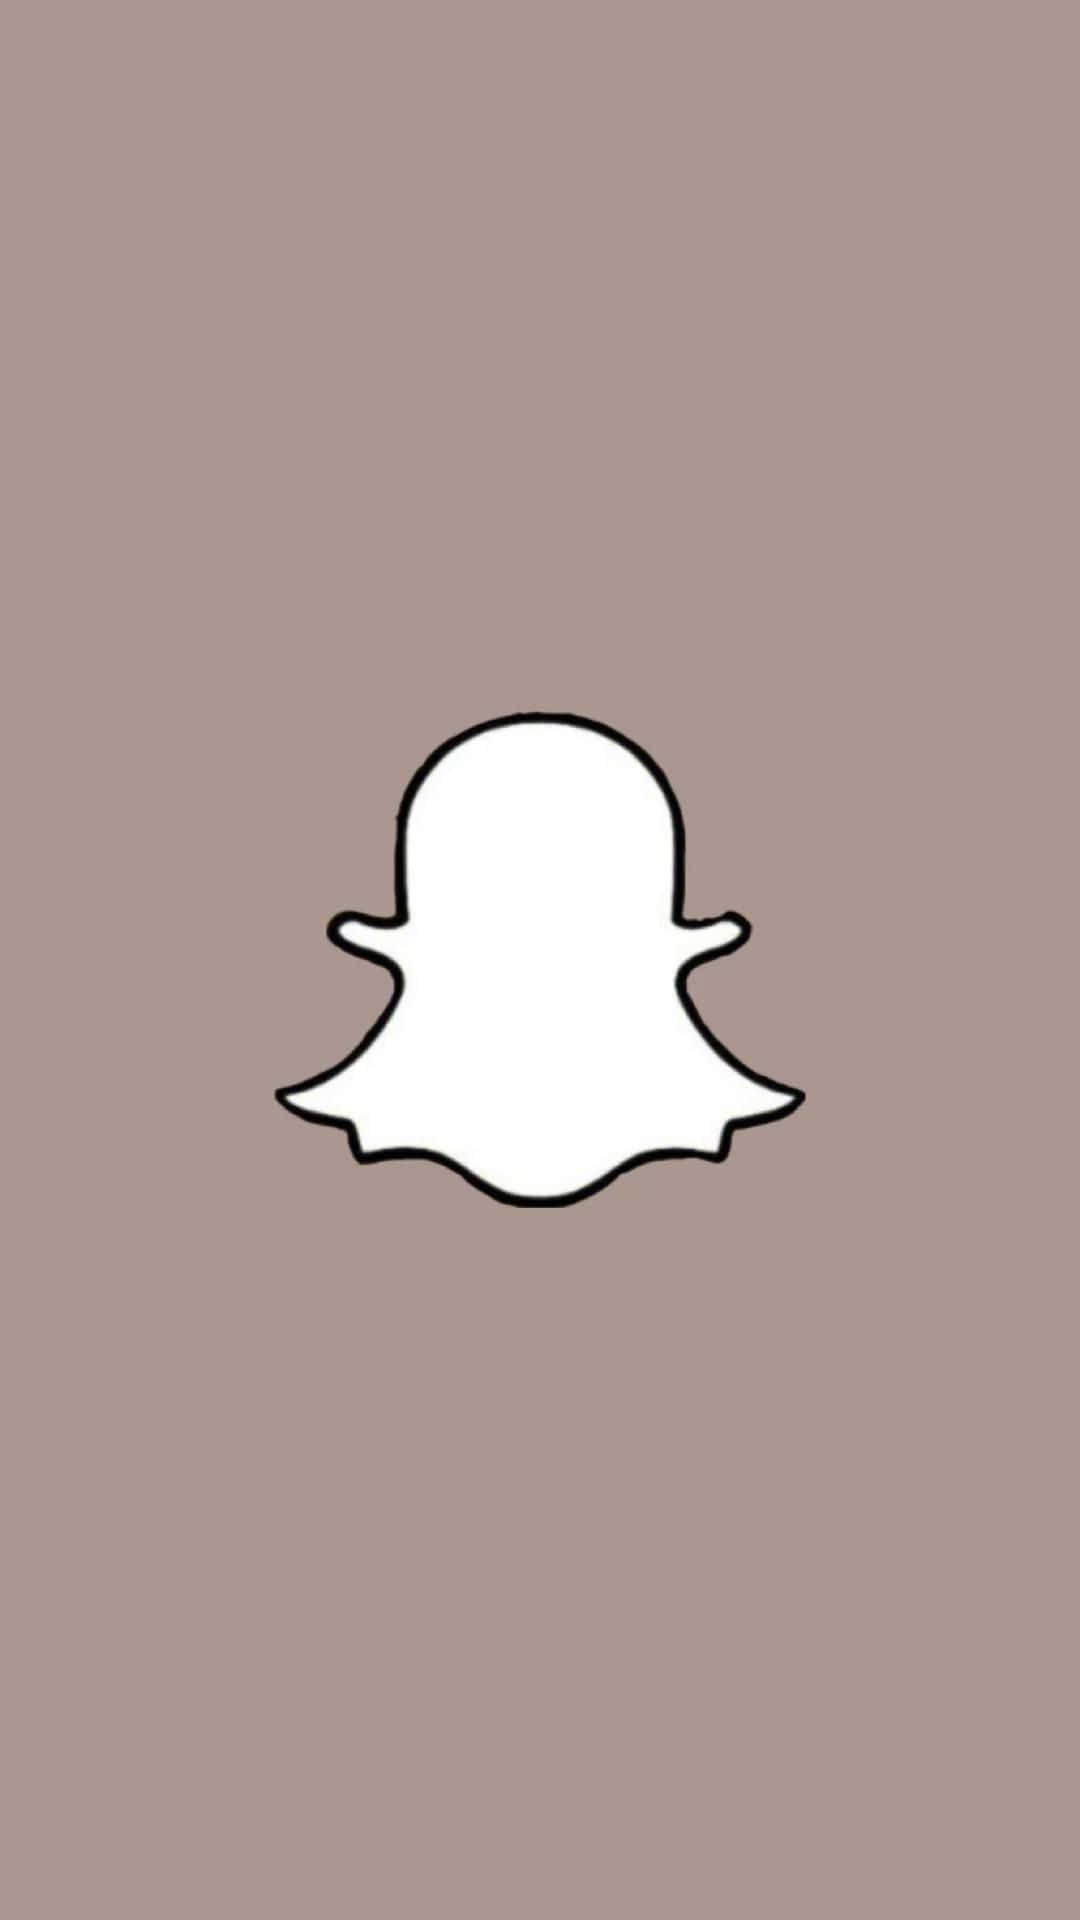 Create amazing moments with Snapchat